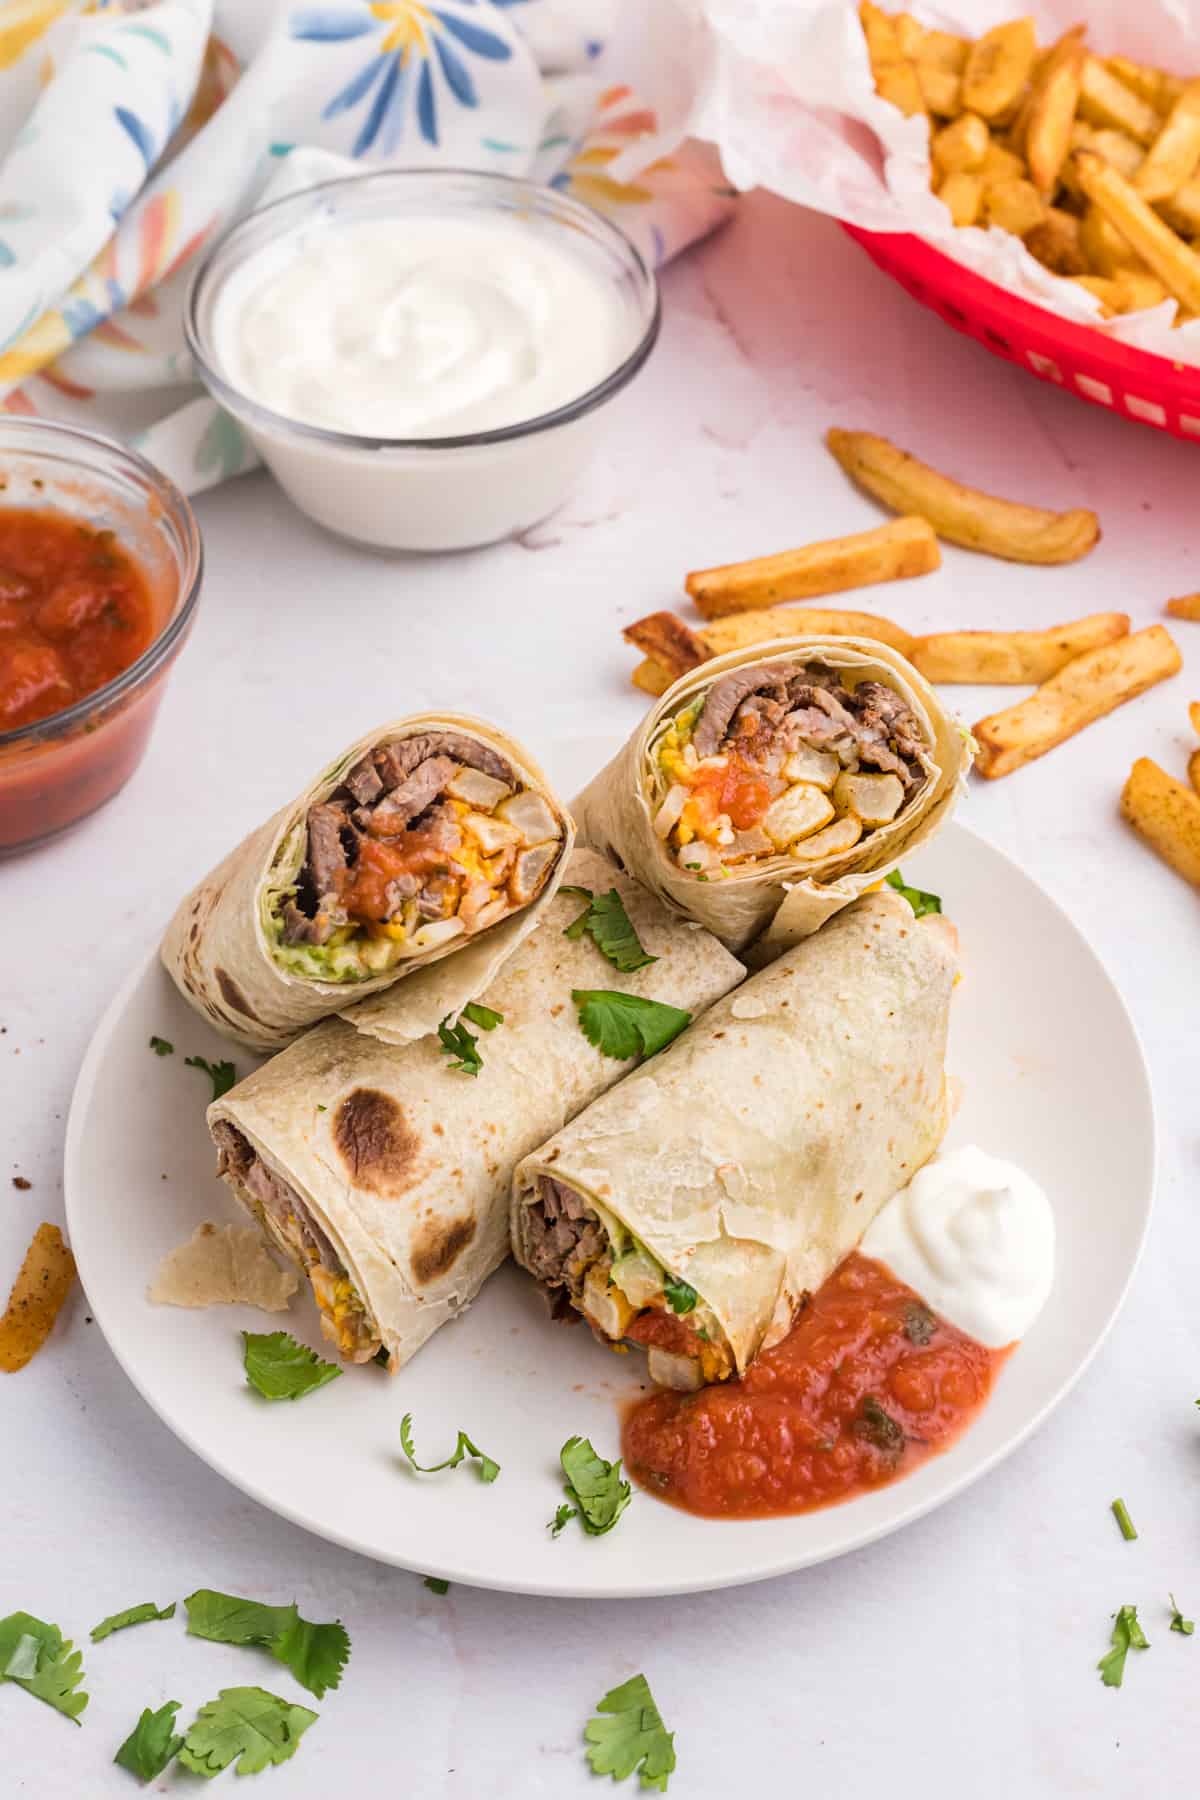 Sliced portions of burritos are placed together on a white plate.